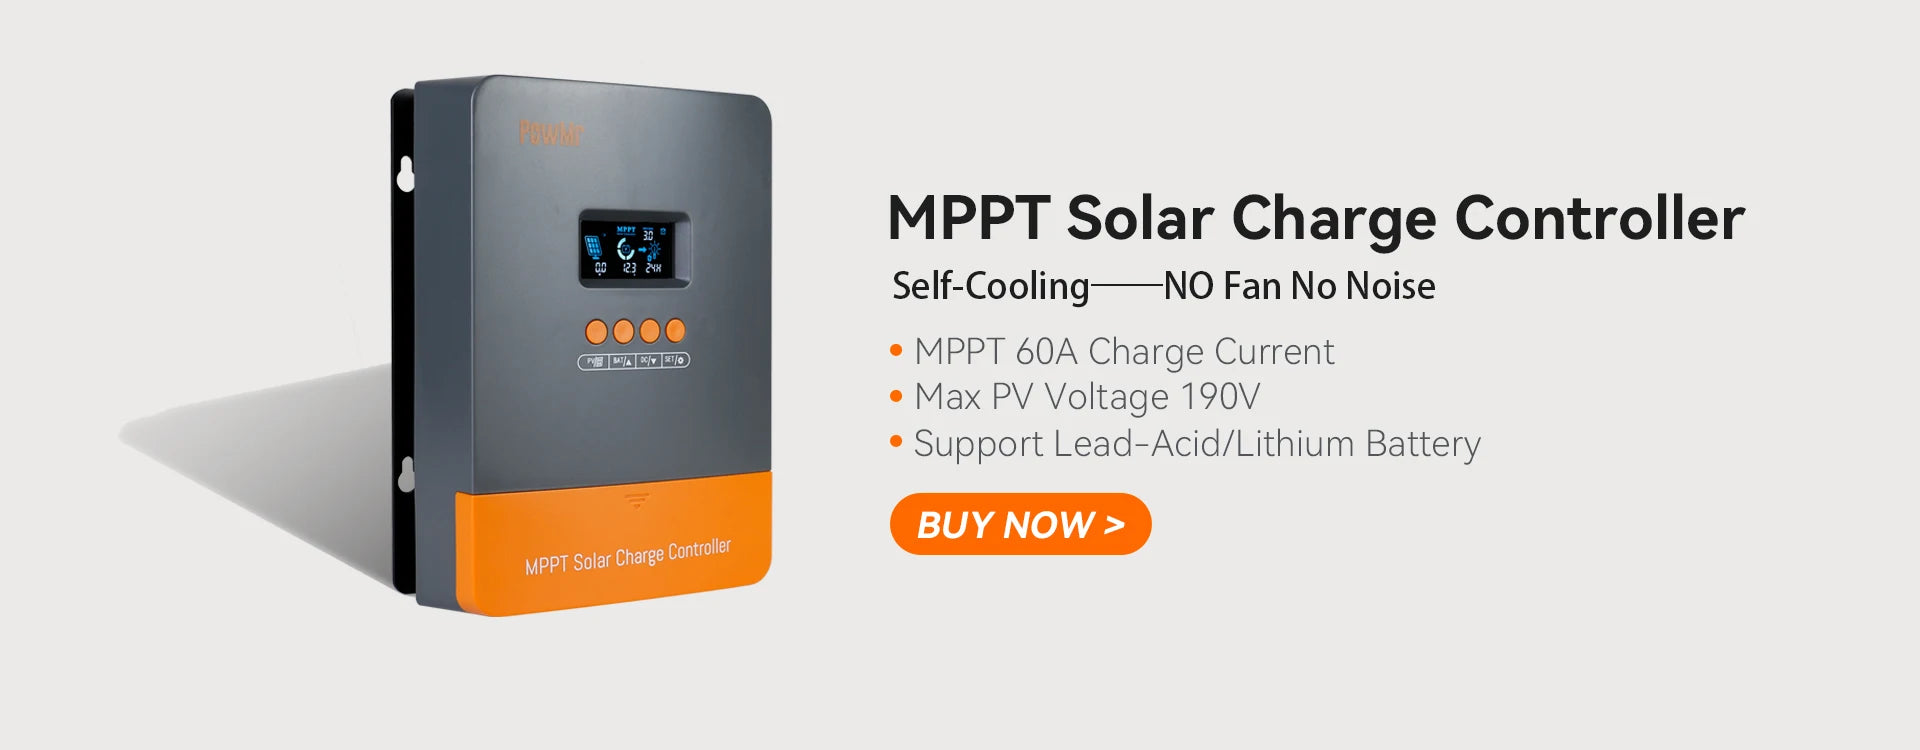 PowMr Solar Charge Controller, High-performance solar charger with self-cooling, quiet operation, handles 60A/190V for lead-acid and lithium batteries.